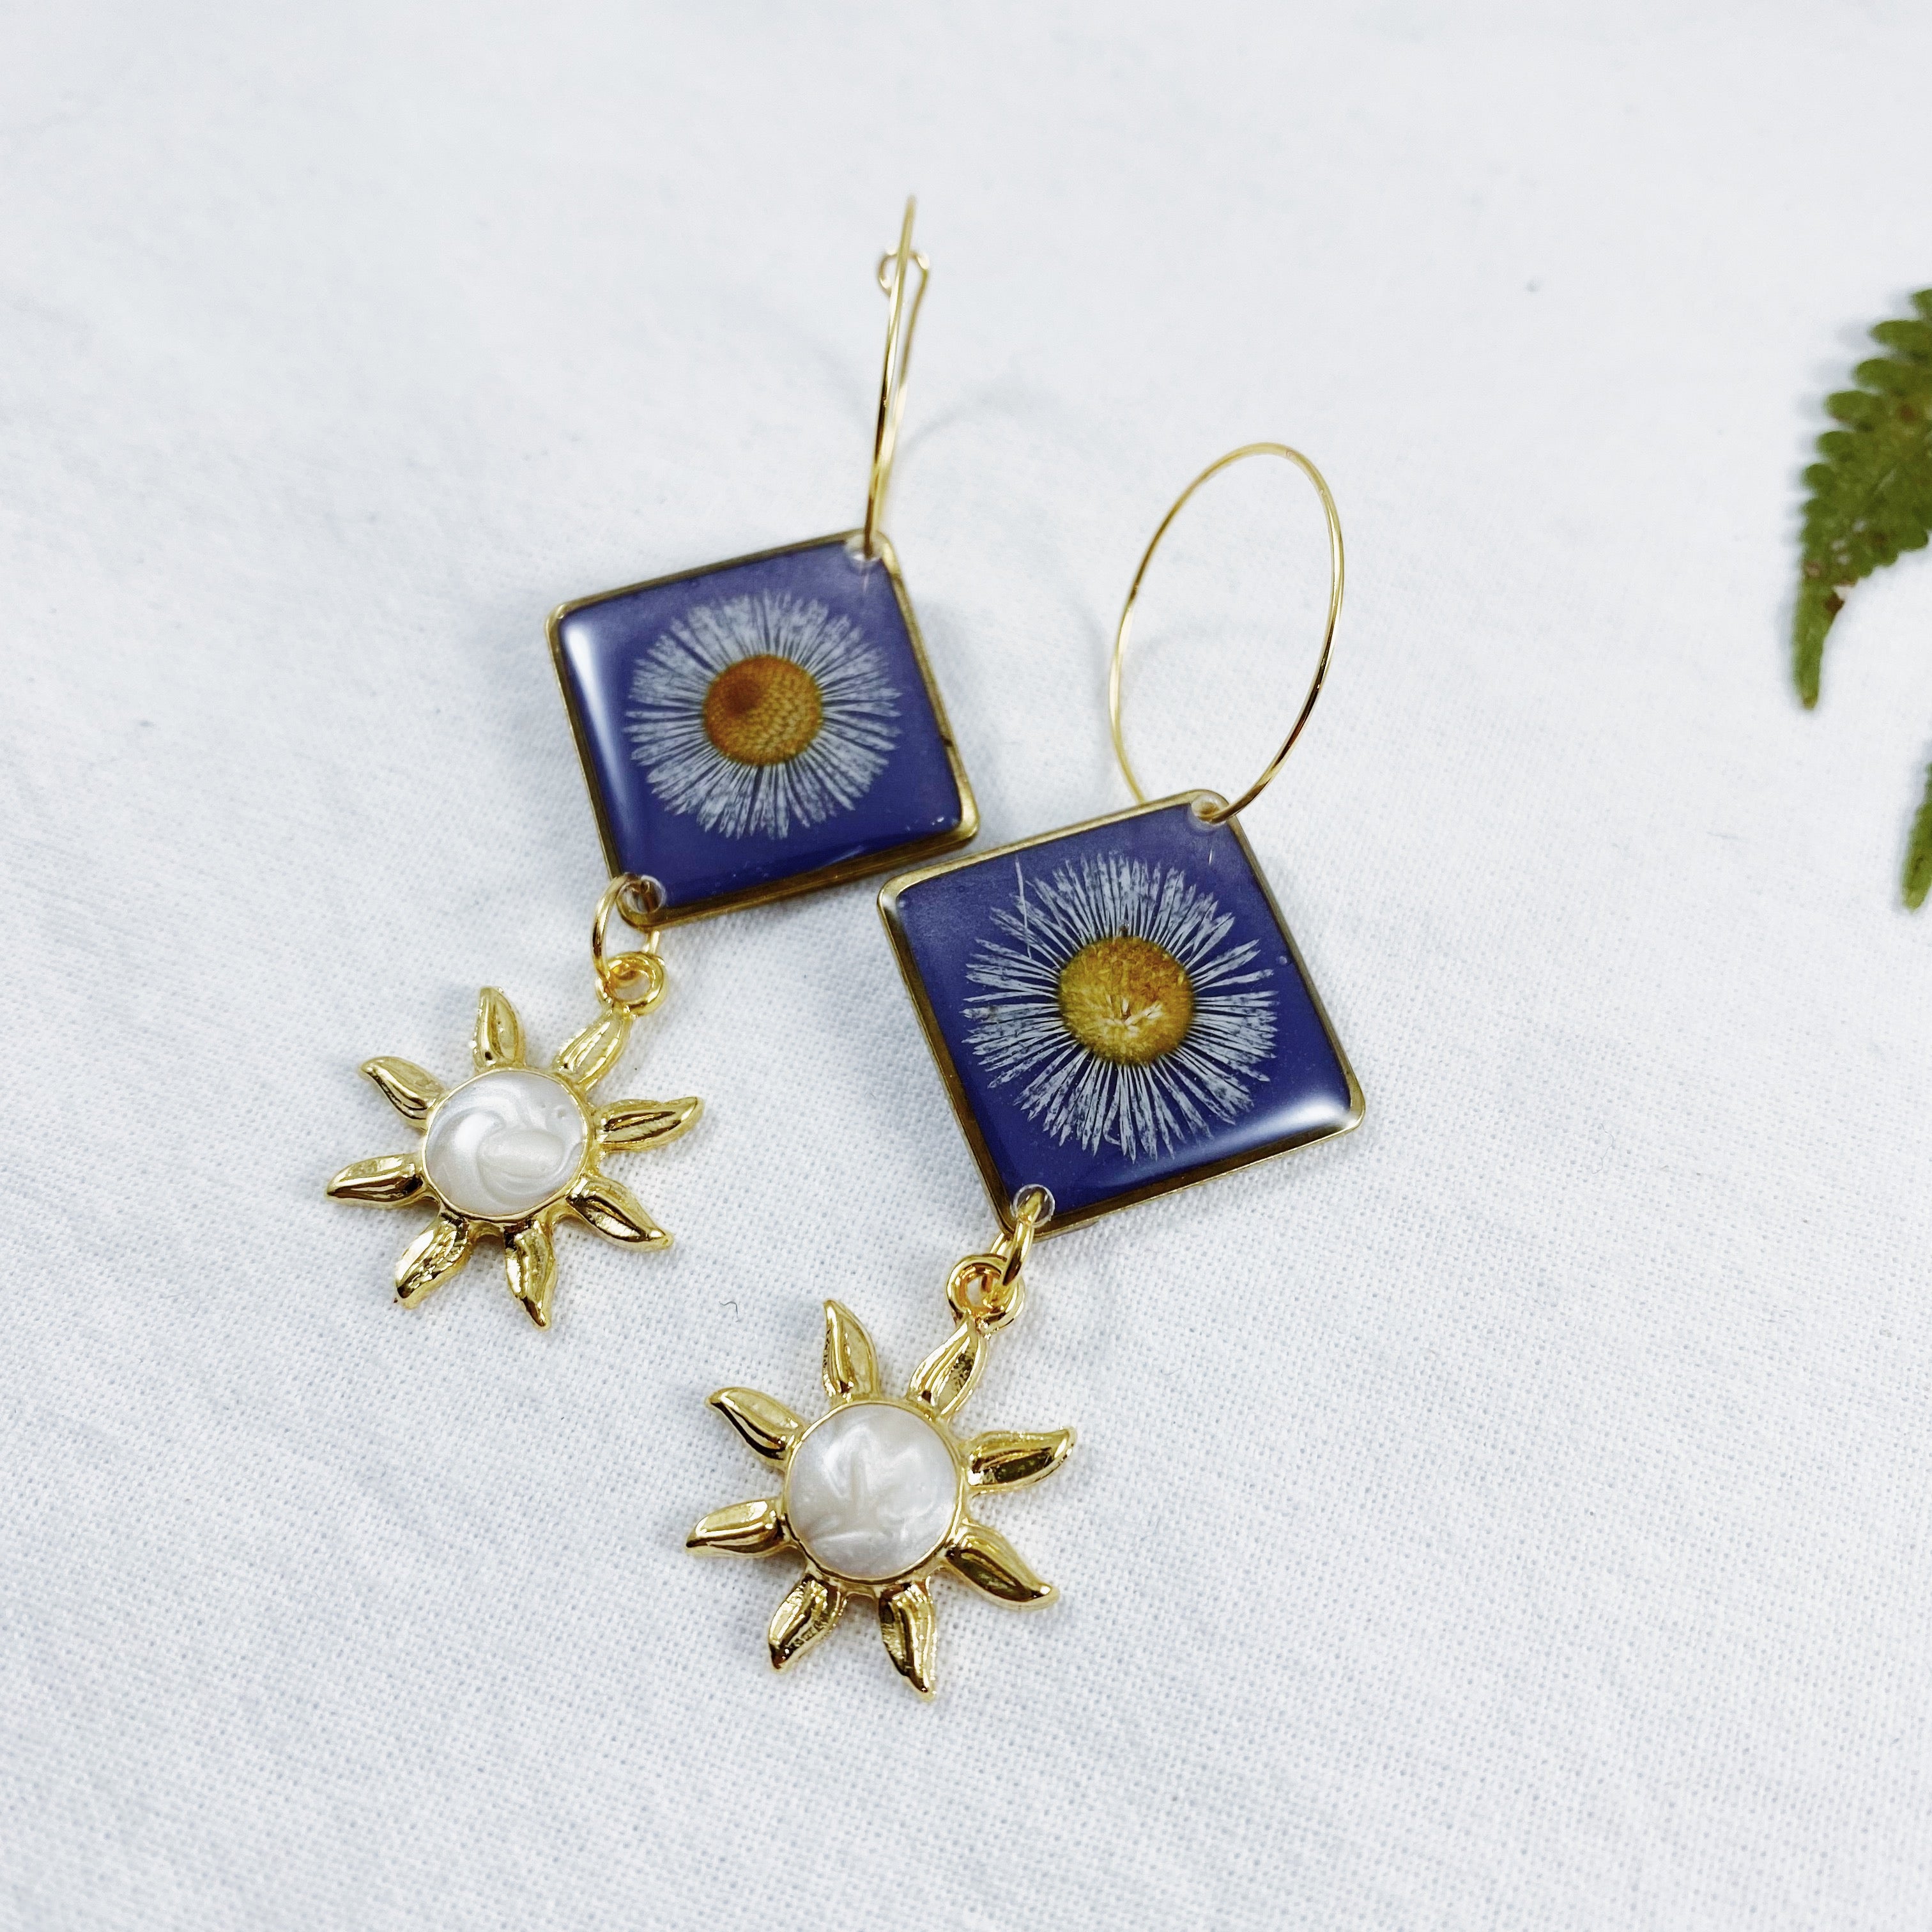 Compassion Collection - Gold Sunshine Earrings